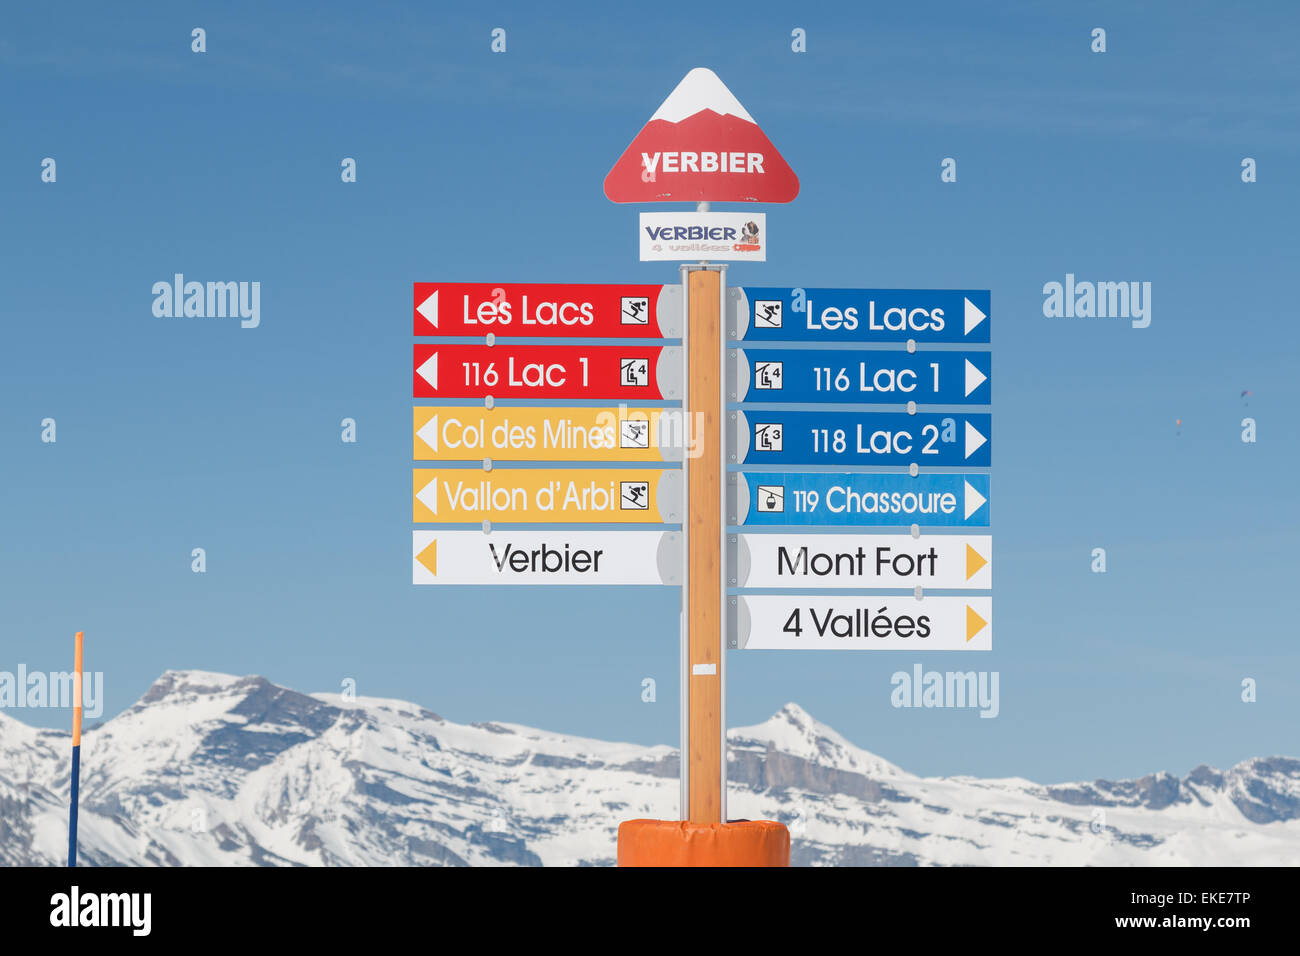 Ski run signpost in Verbier Switzerland showing the pistes and ski runs in the Les Lacs area Stock Photo